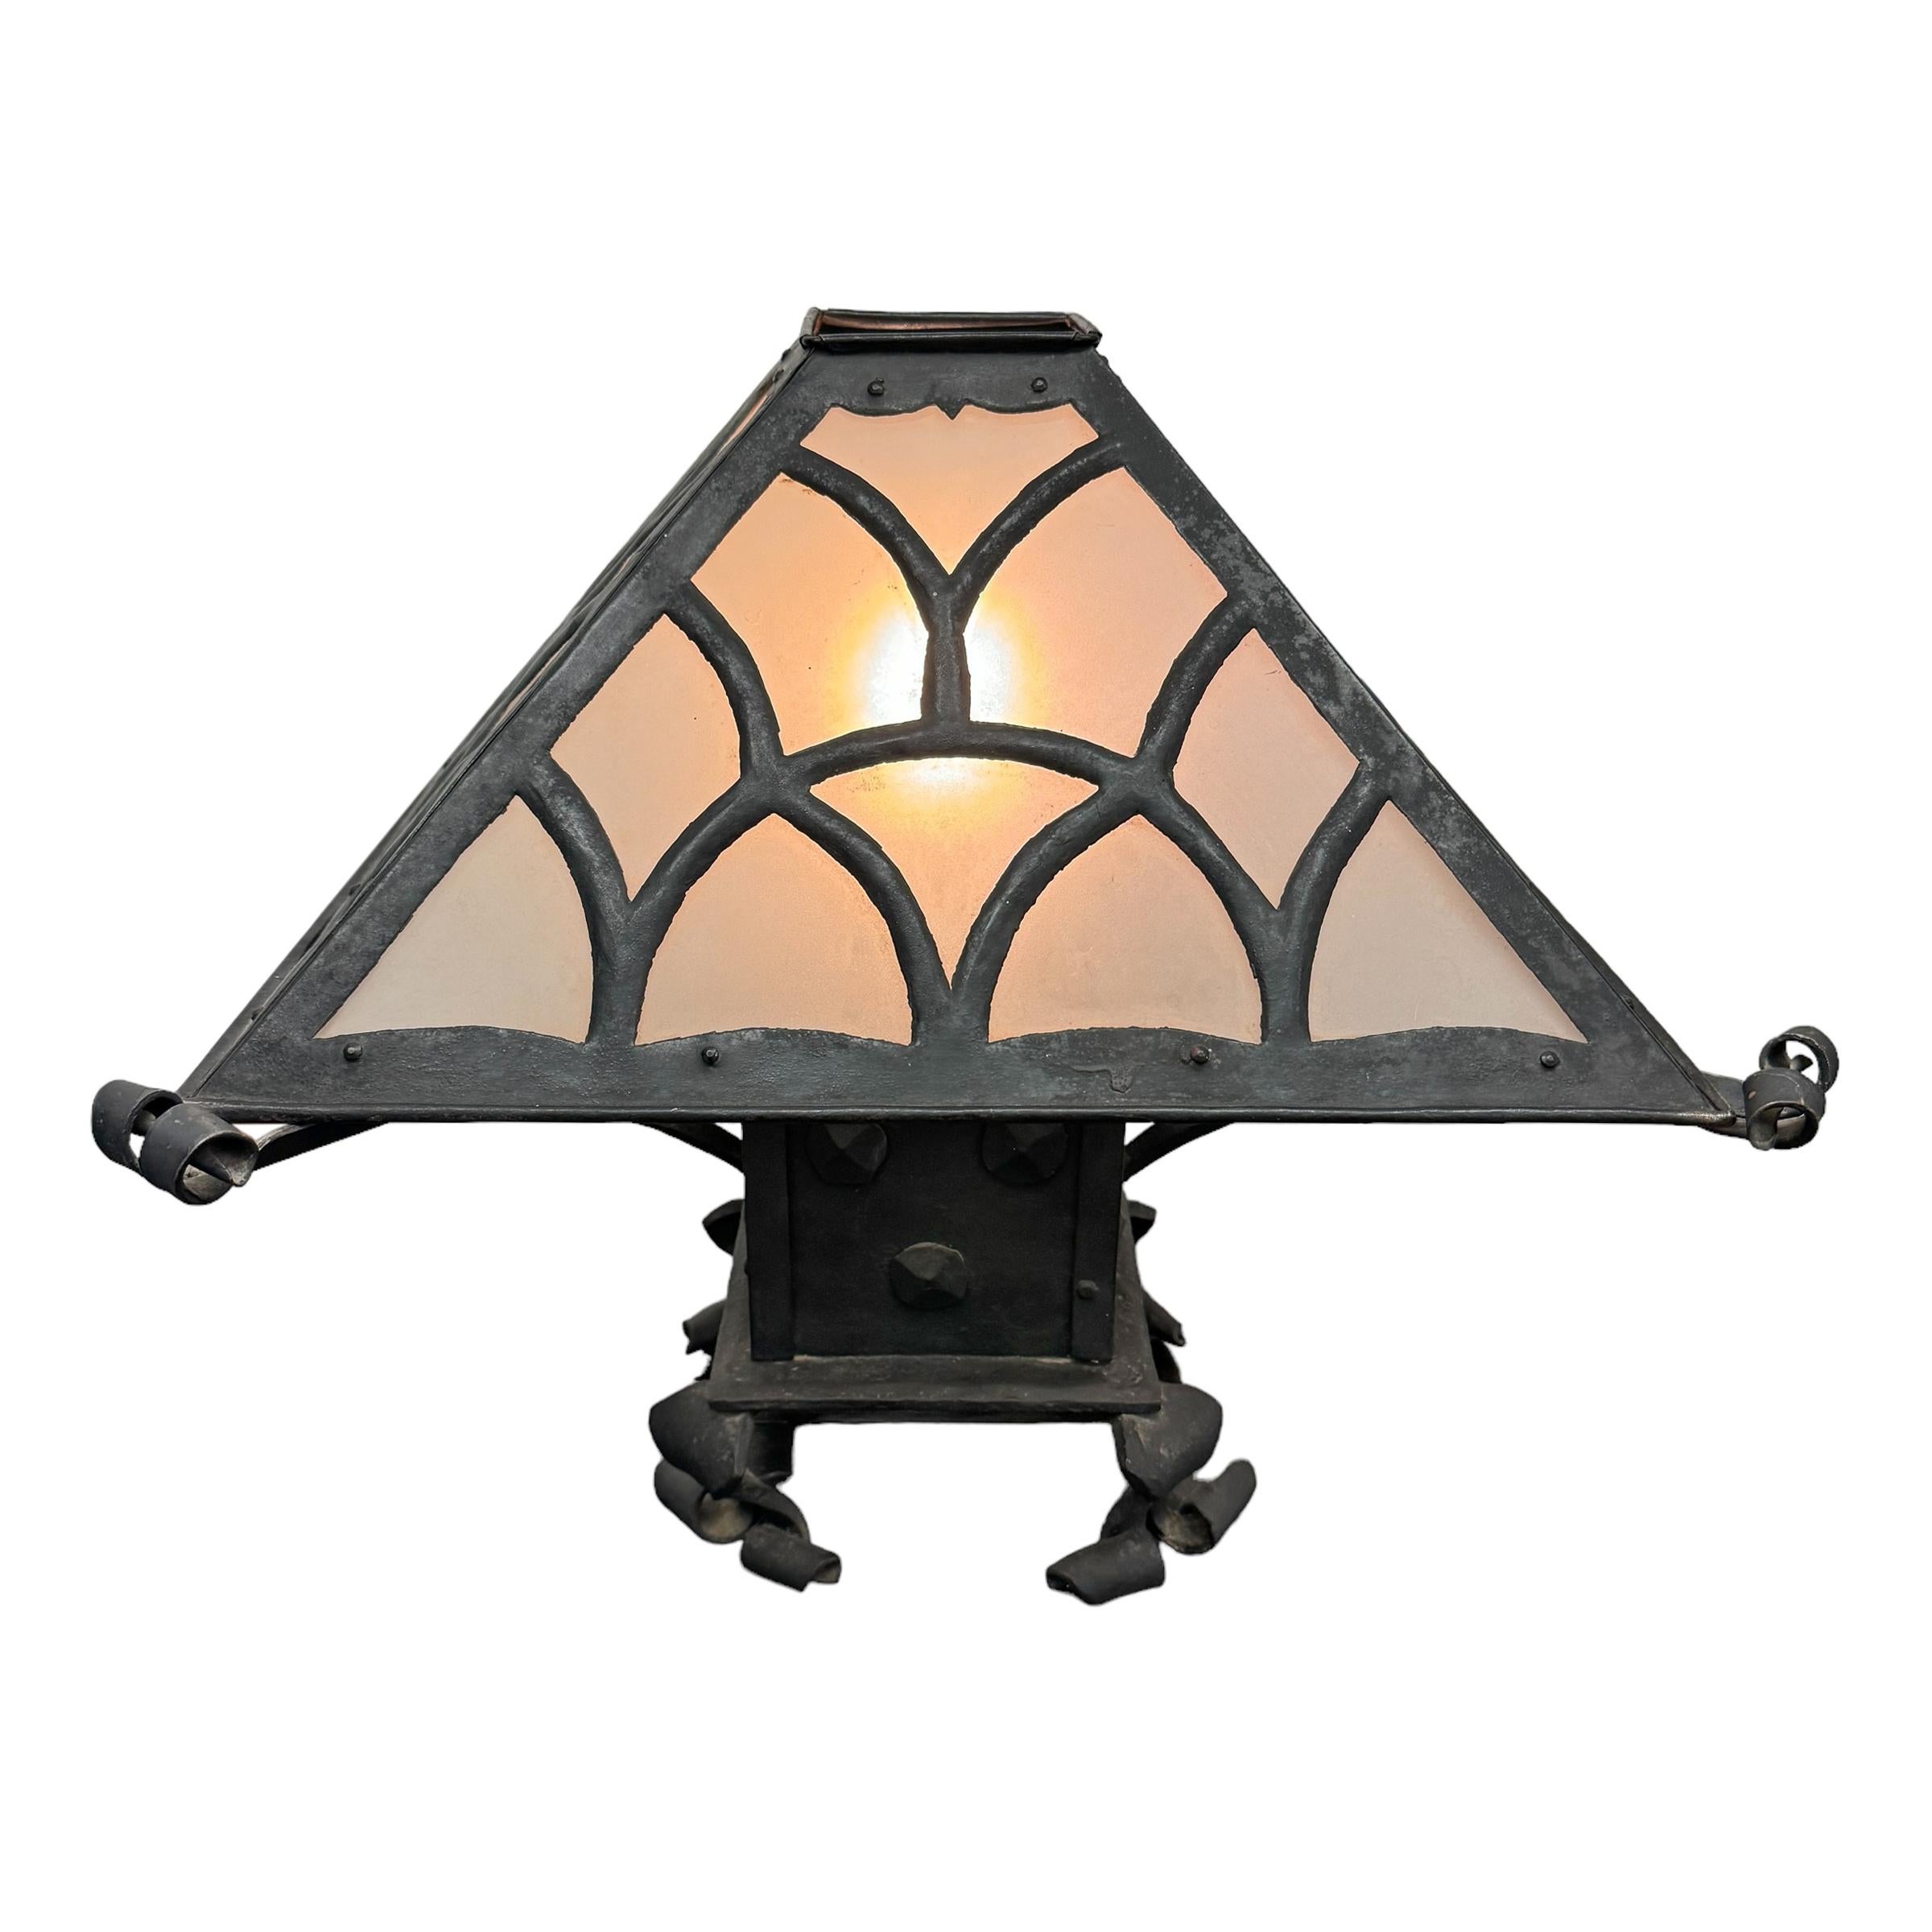 19th Century Late 19th/Early 20th Century American Arts and Crafts Wrought Iron Lamp For Sale